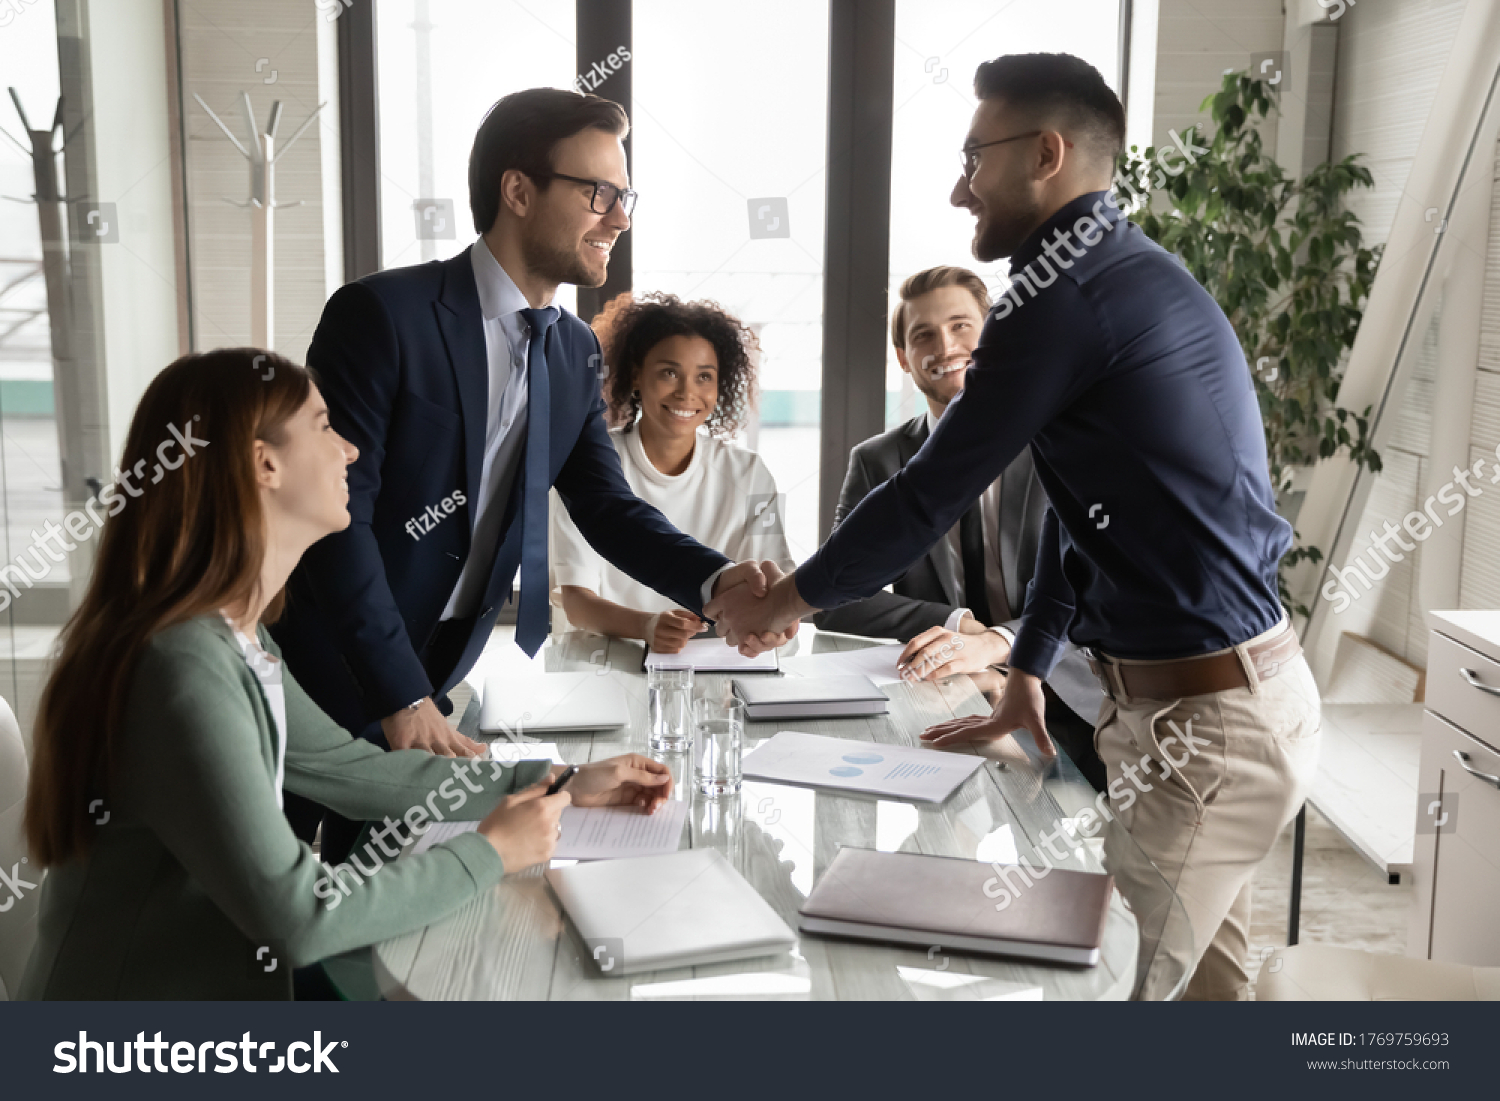 Smiling multiethnic male business partners shake hands close deal make agreement at team meeting in boardroom, excited diverse businessmen handshake get acquainted greeting at briefing in office #1769759693